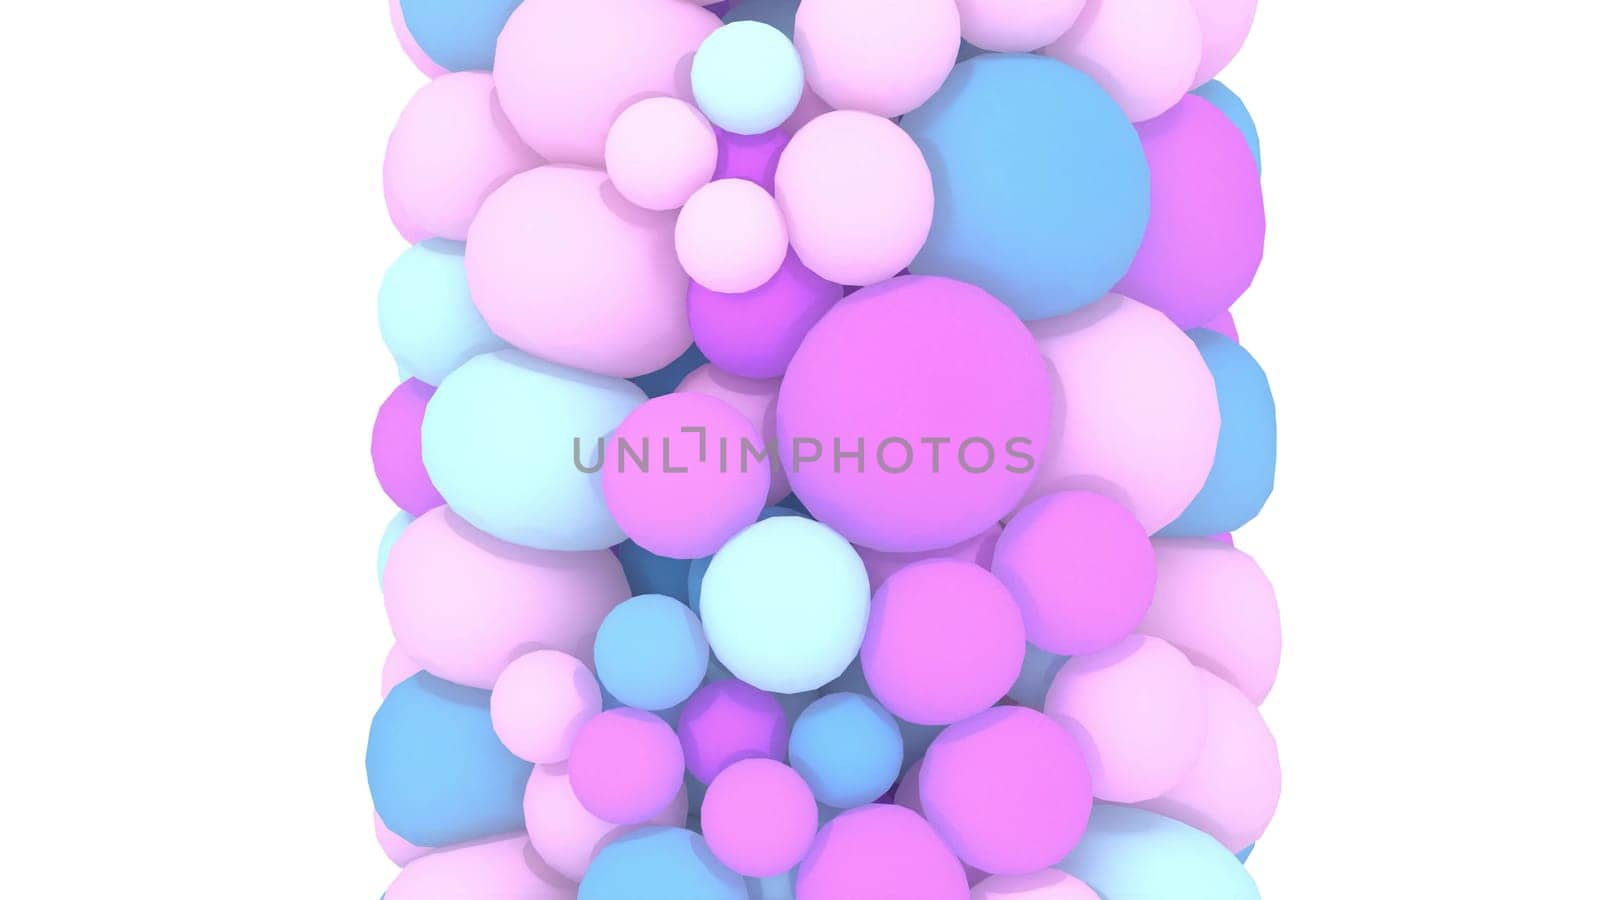 Colorful pastel pink and blue spheres arranged in a vertical column on a white back 3d render by Zozulinskyi